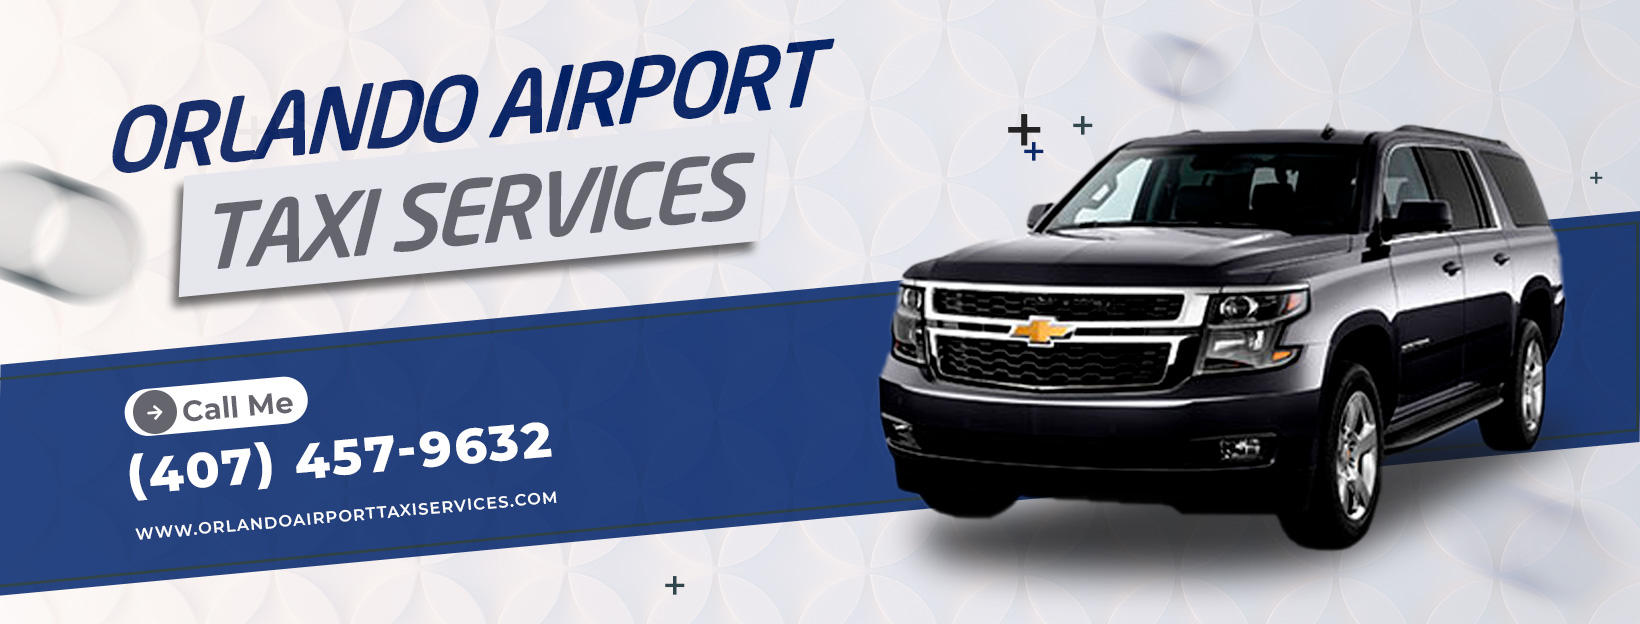 orlandoairporttaxiservices